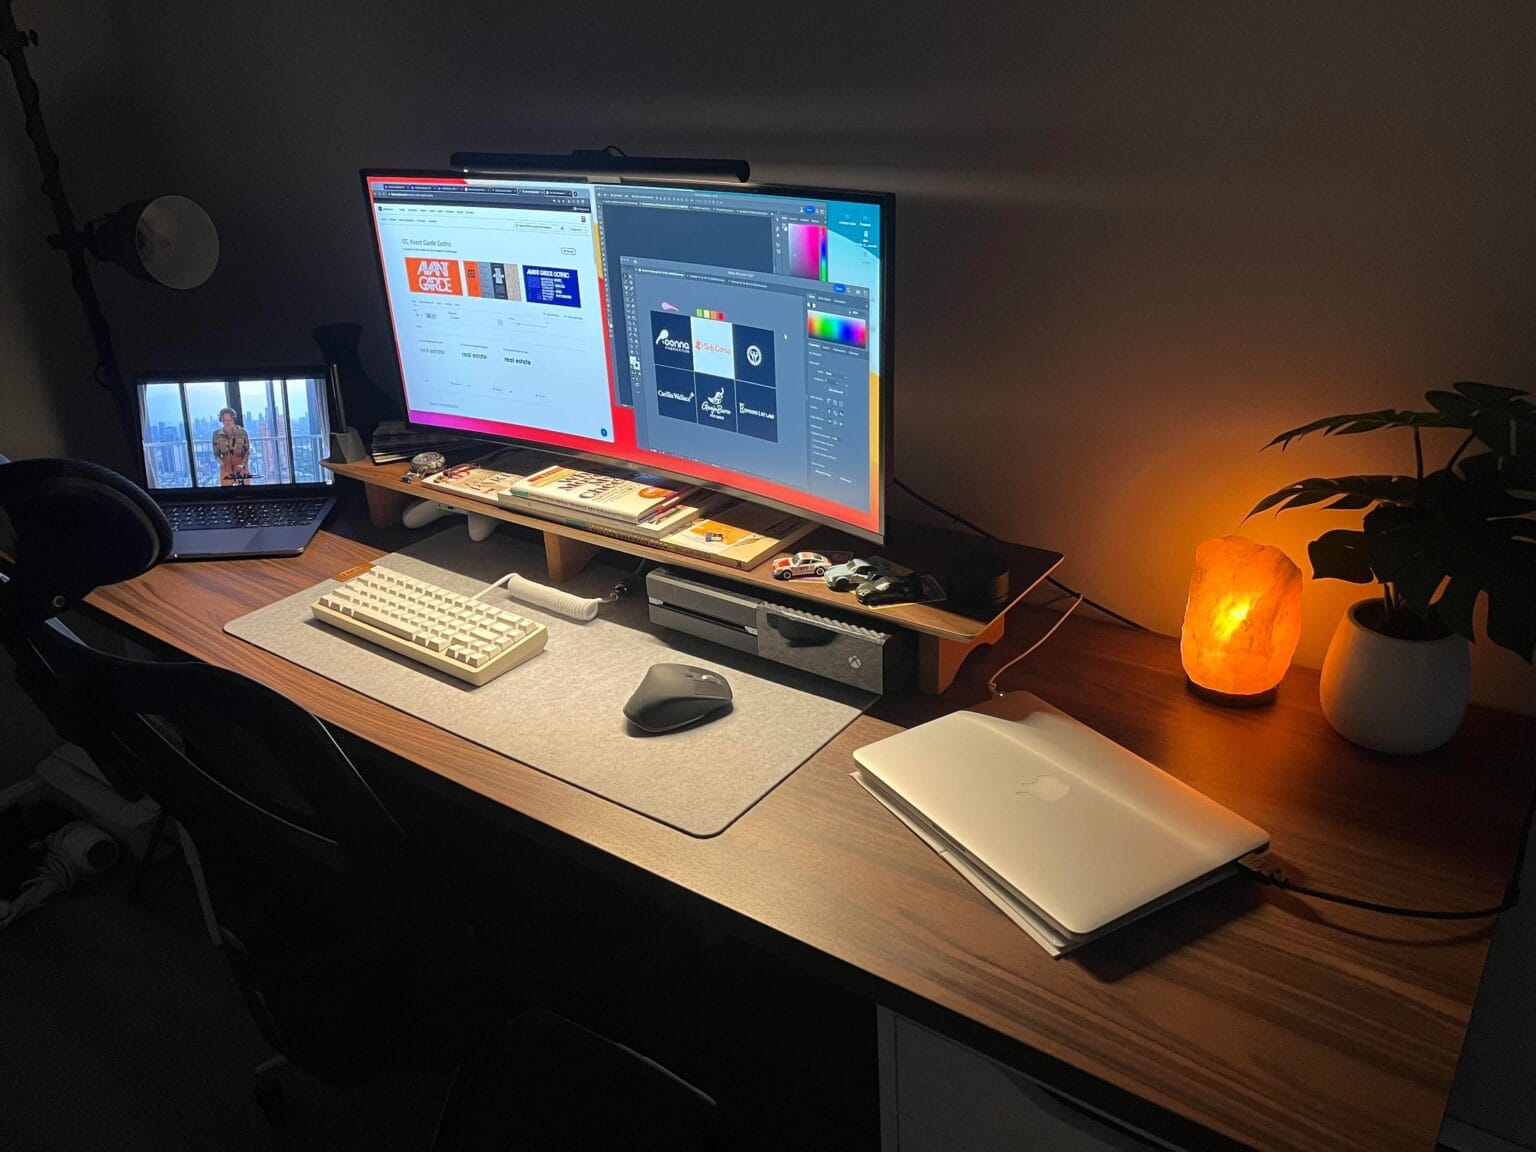 This setup features an M2 MacBook Pro, but it still uses a 2015 Retina model, too.